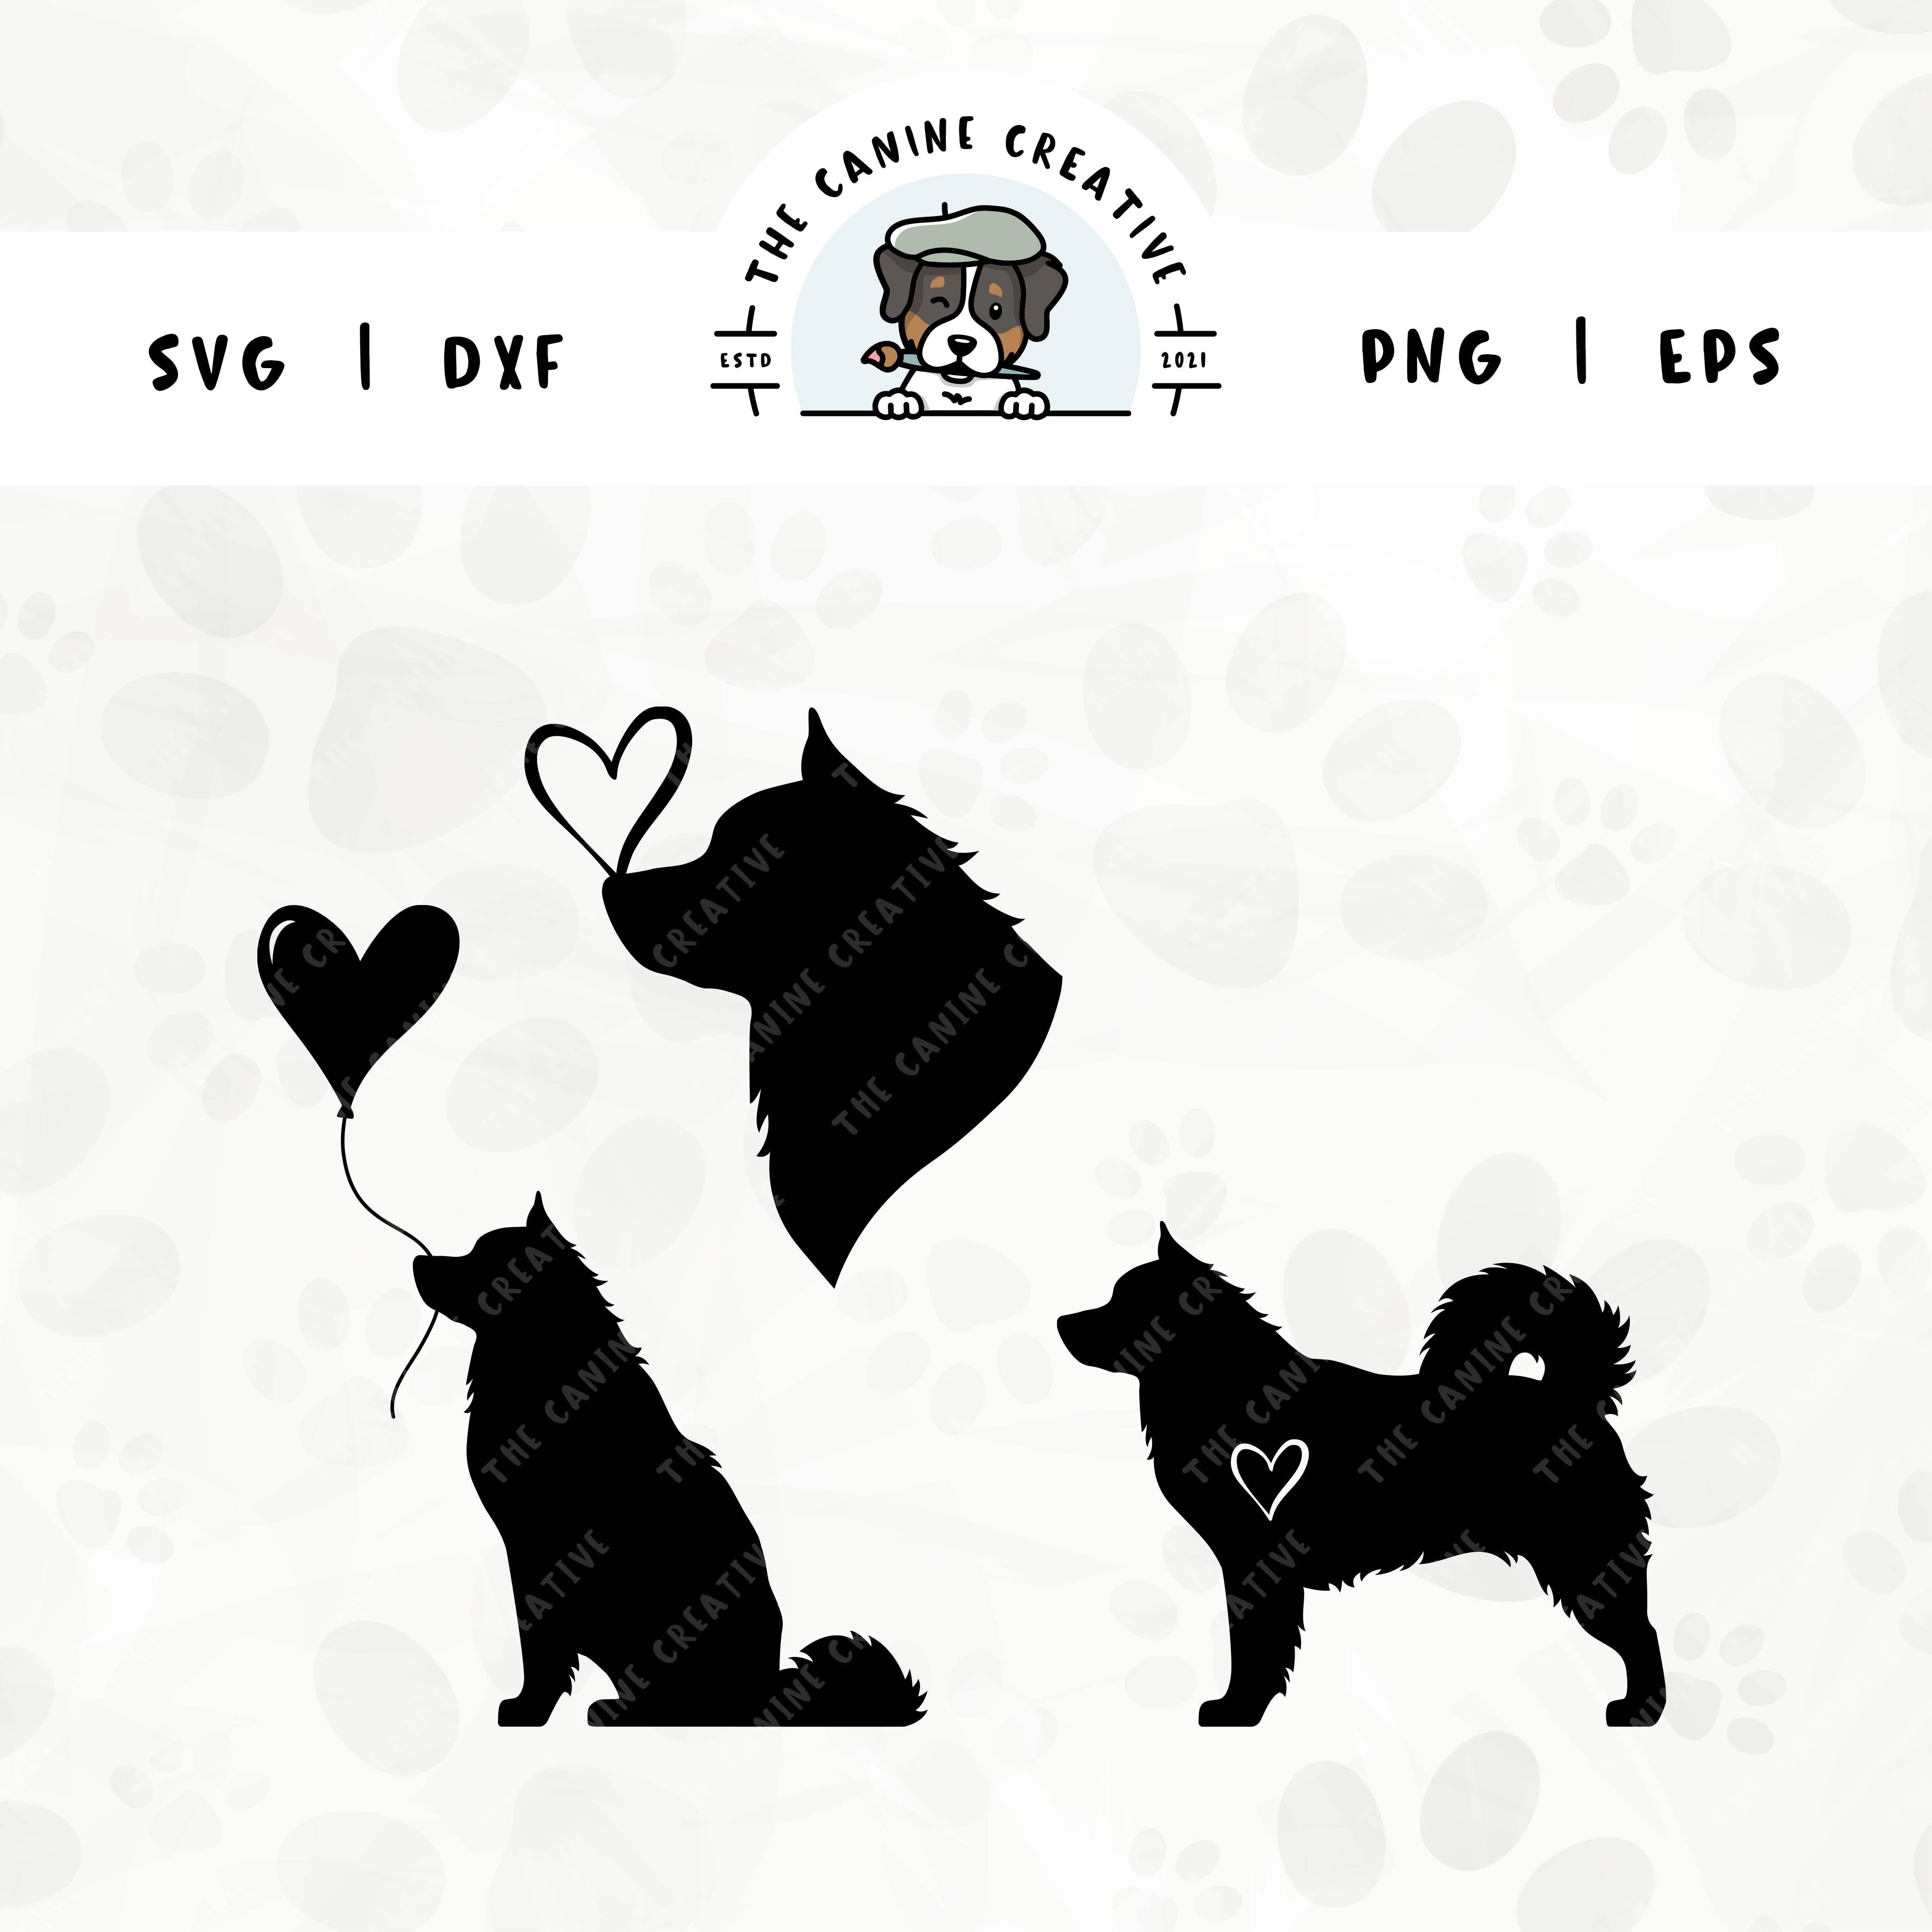 This 3-pack Alaskan Malamute silhouette bundle features a head portrait of a dog with a heart perched atop it’s nose, a sitting dog holding a heart balloon, and a standing profile of a dog with a heart inset. File formats include: SVG, DXF, PNG, and EPS.